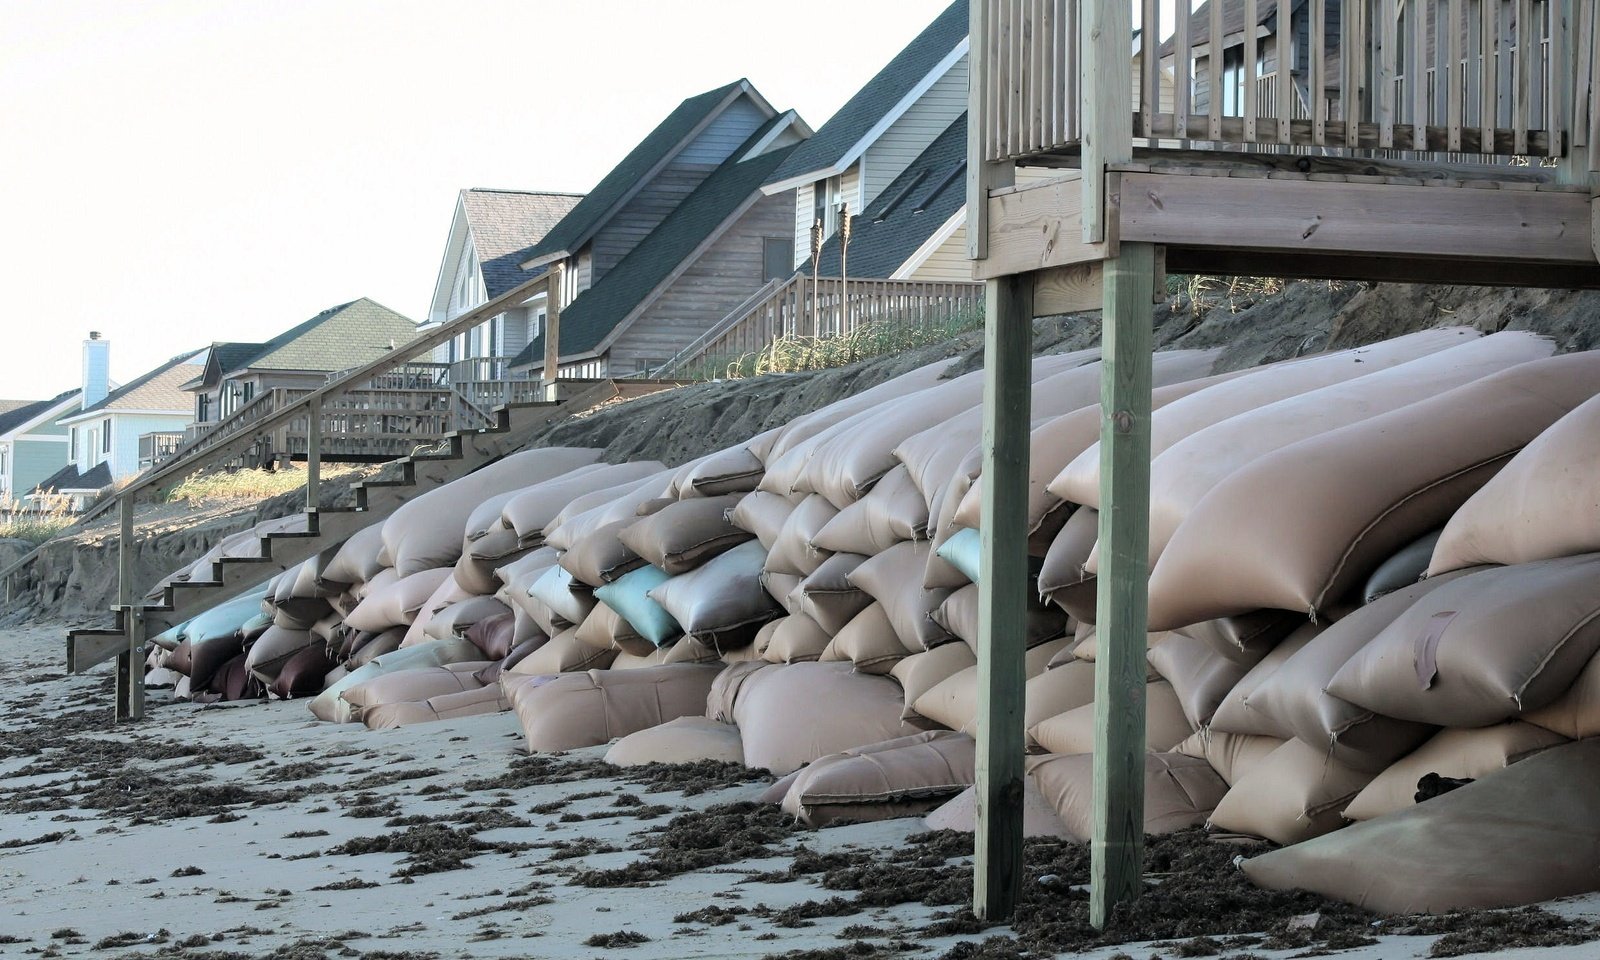 bags and pillows lined up next to a wooden deck on the beach